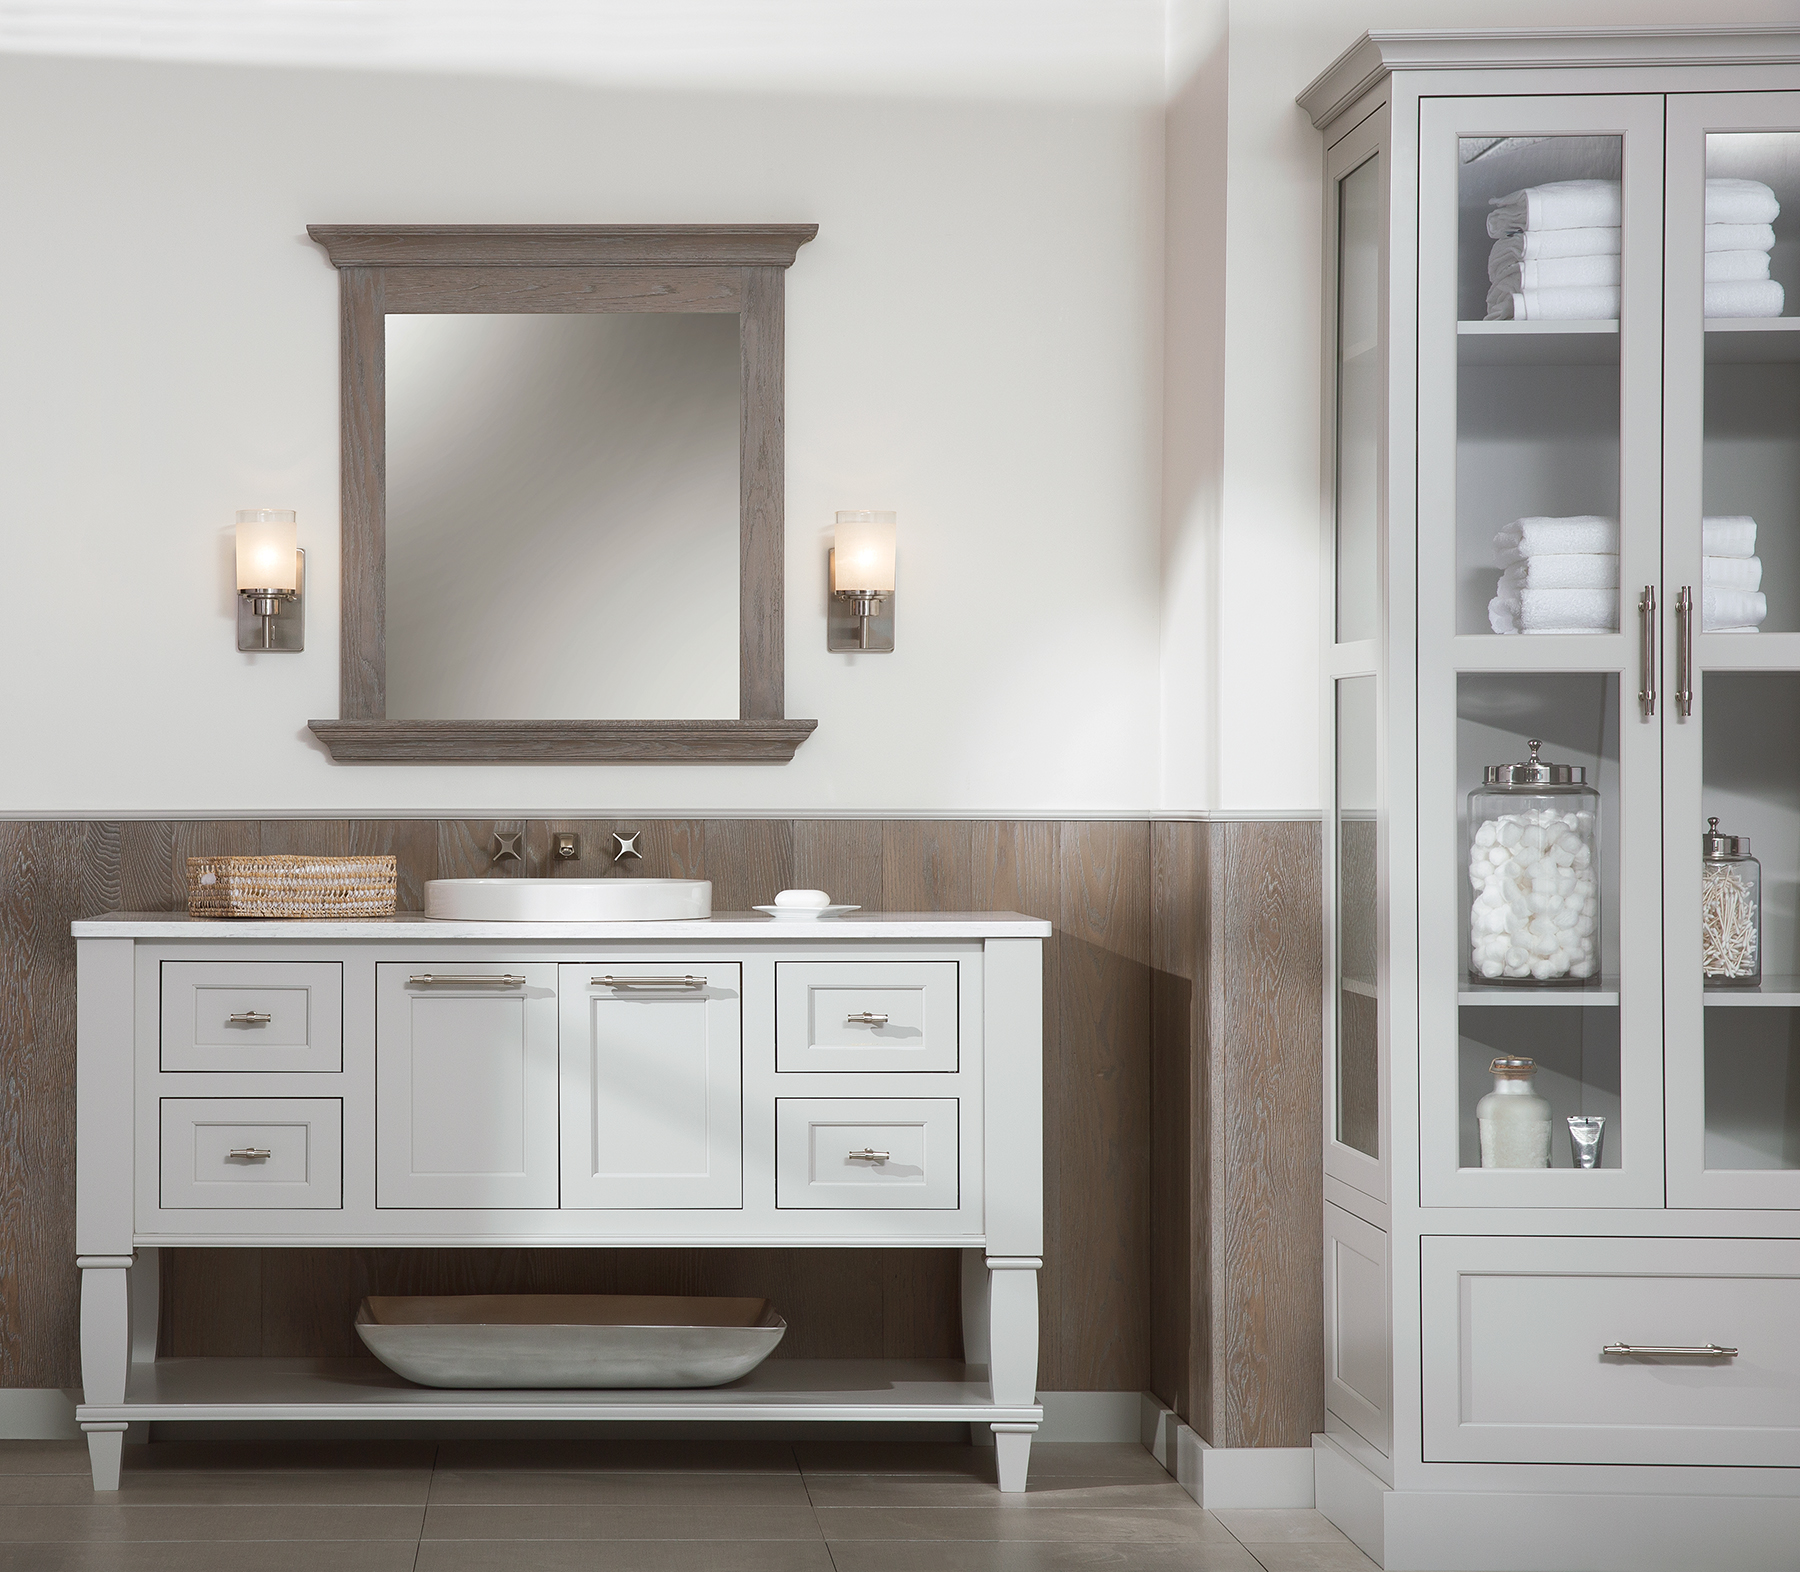 Bathroom furniture cabinets by Dura Supreme Cabinetry